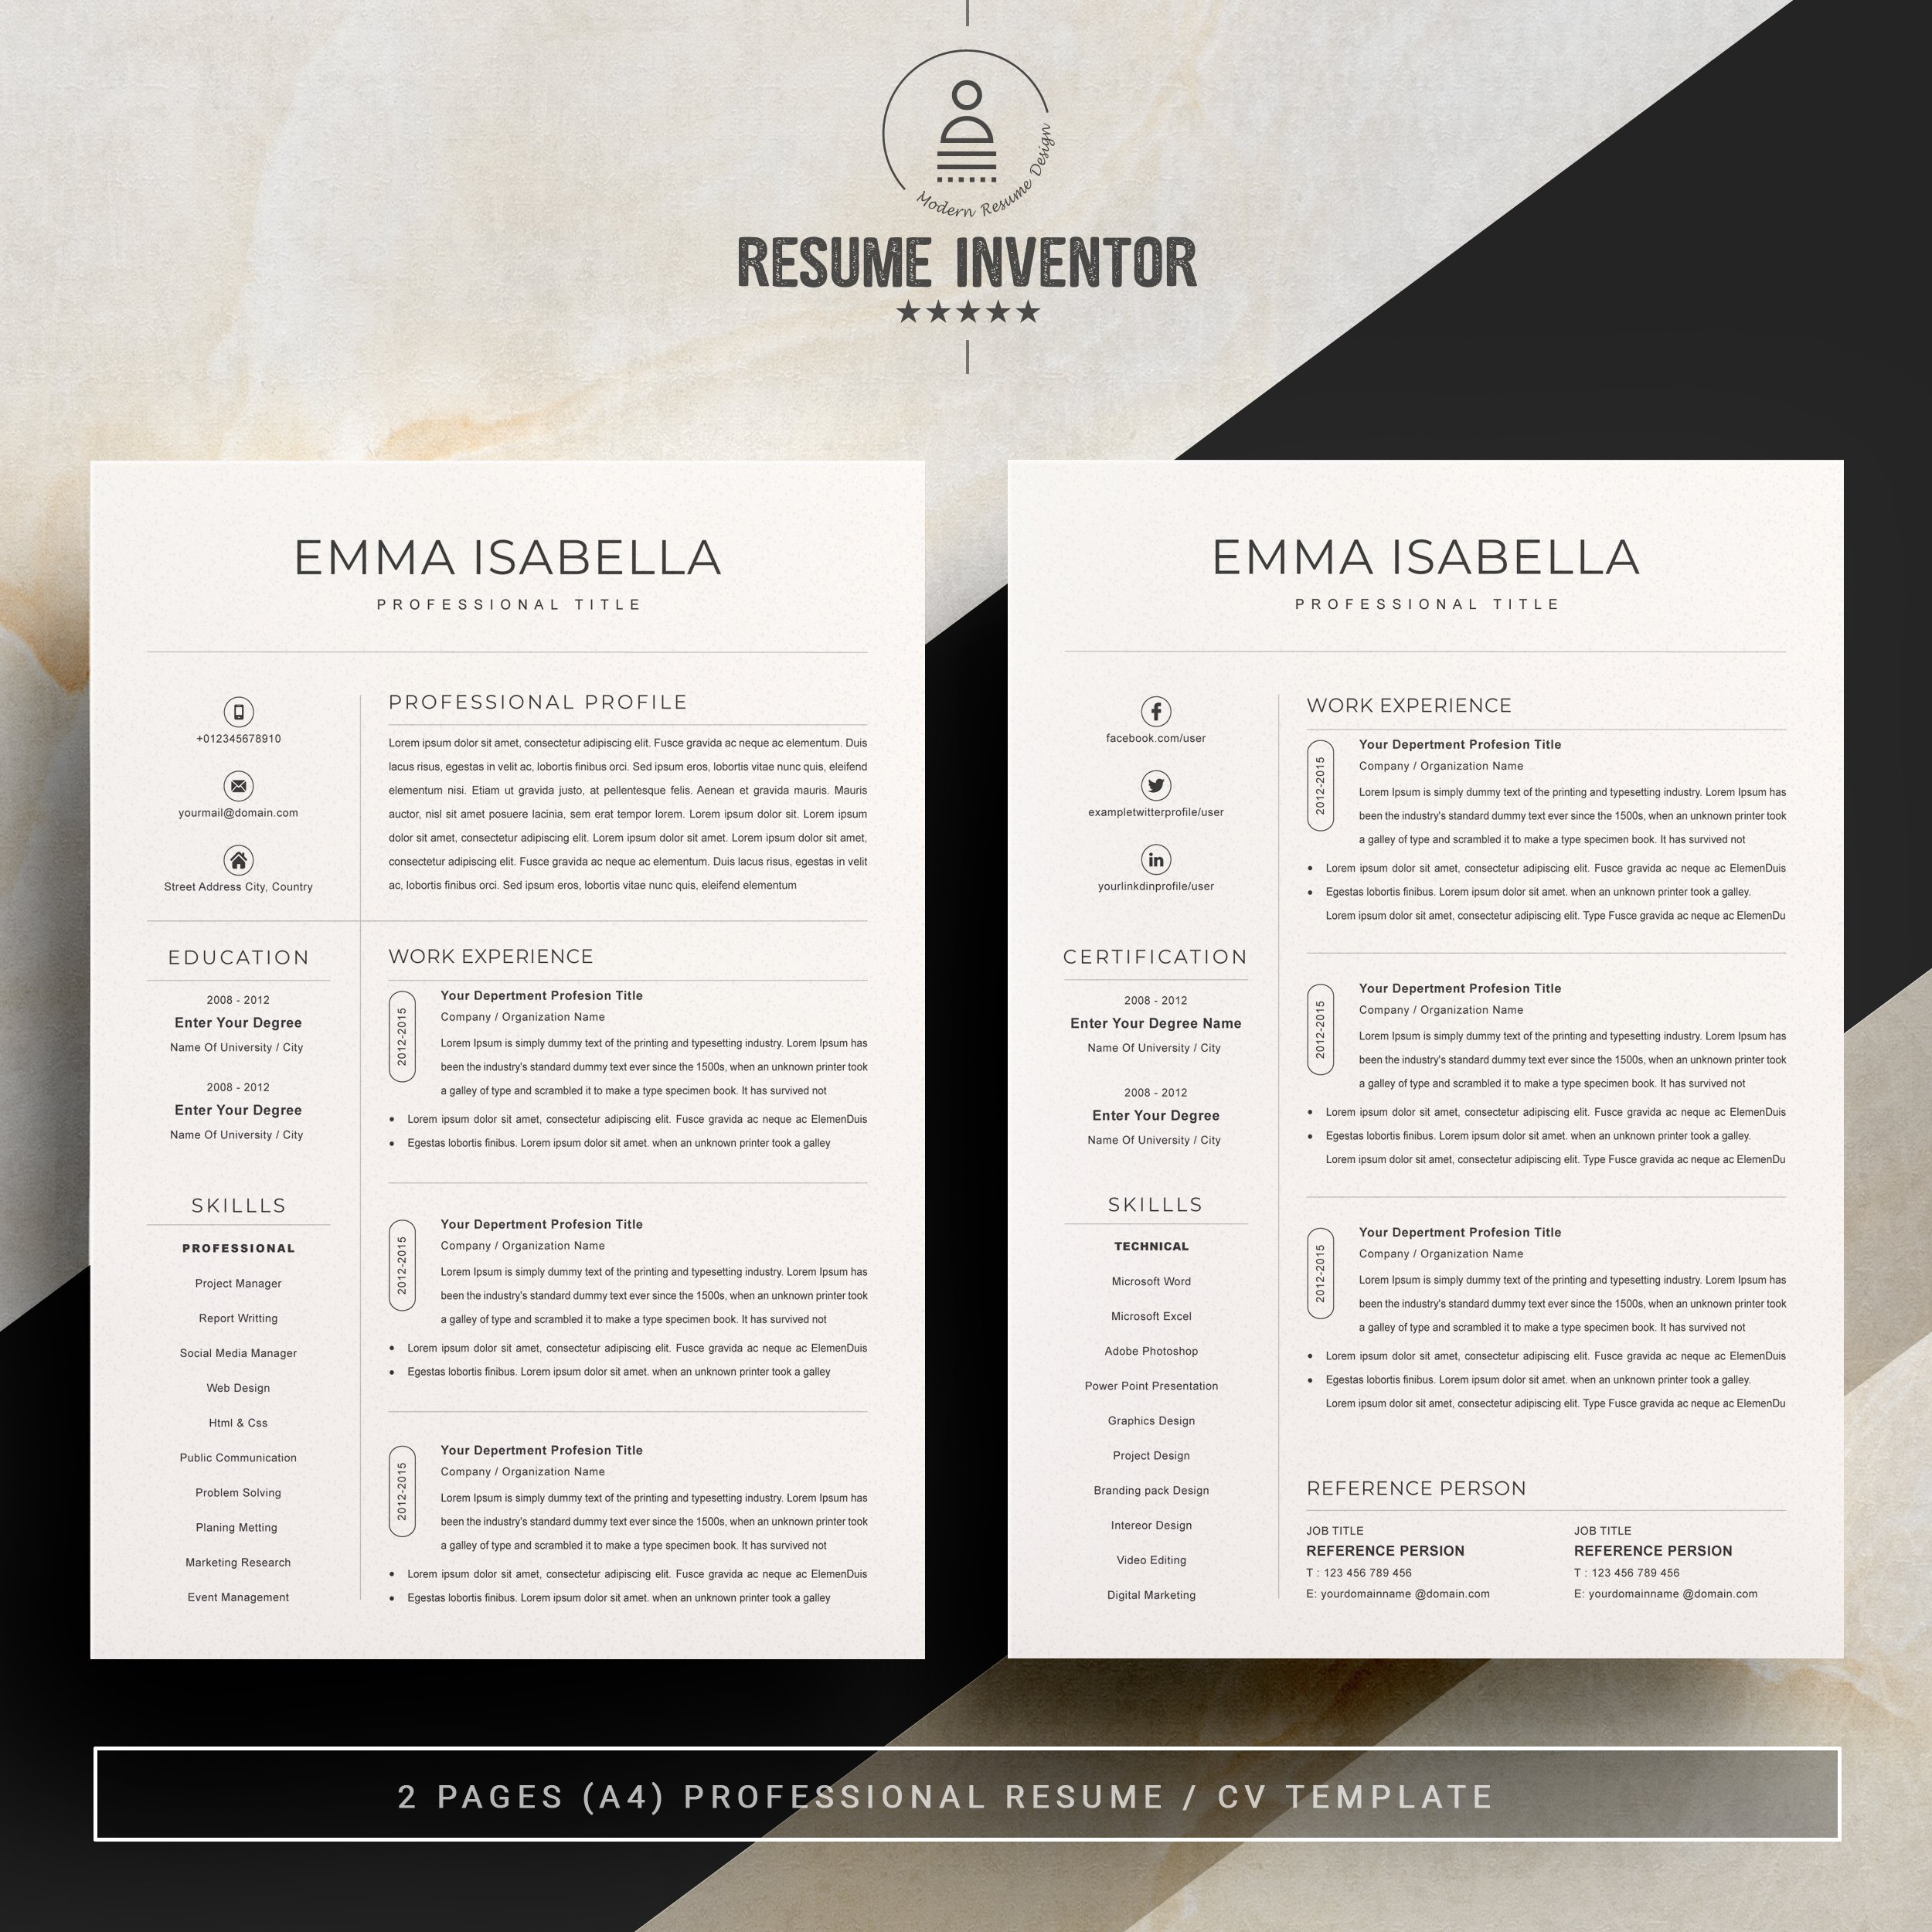 Free Resume Template | CV Format preview image.